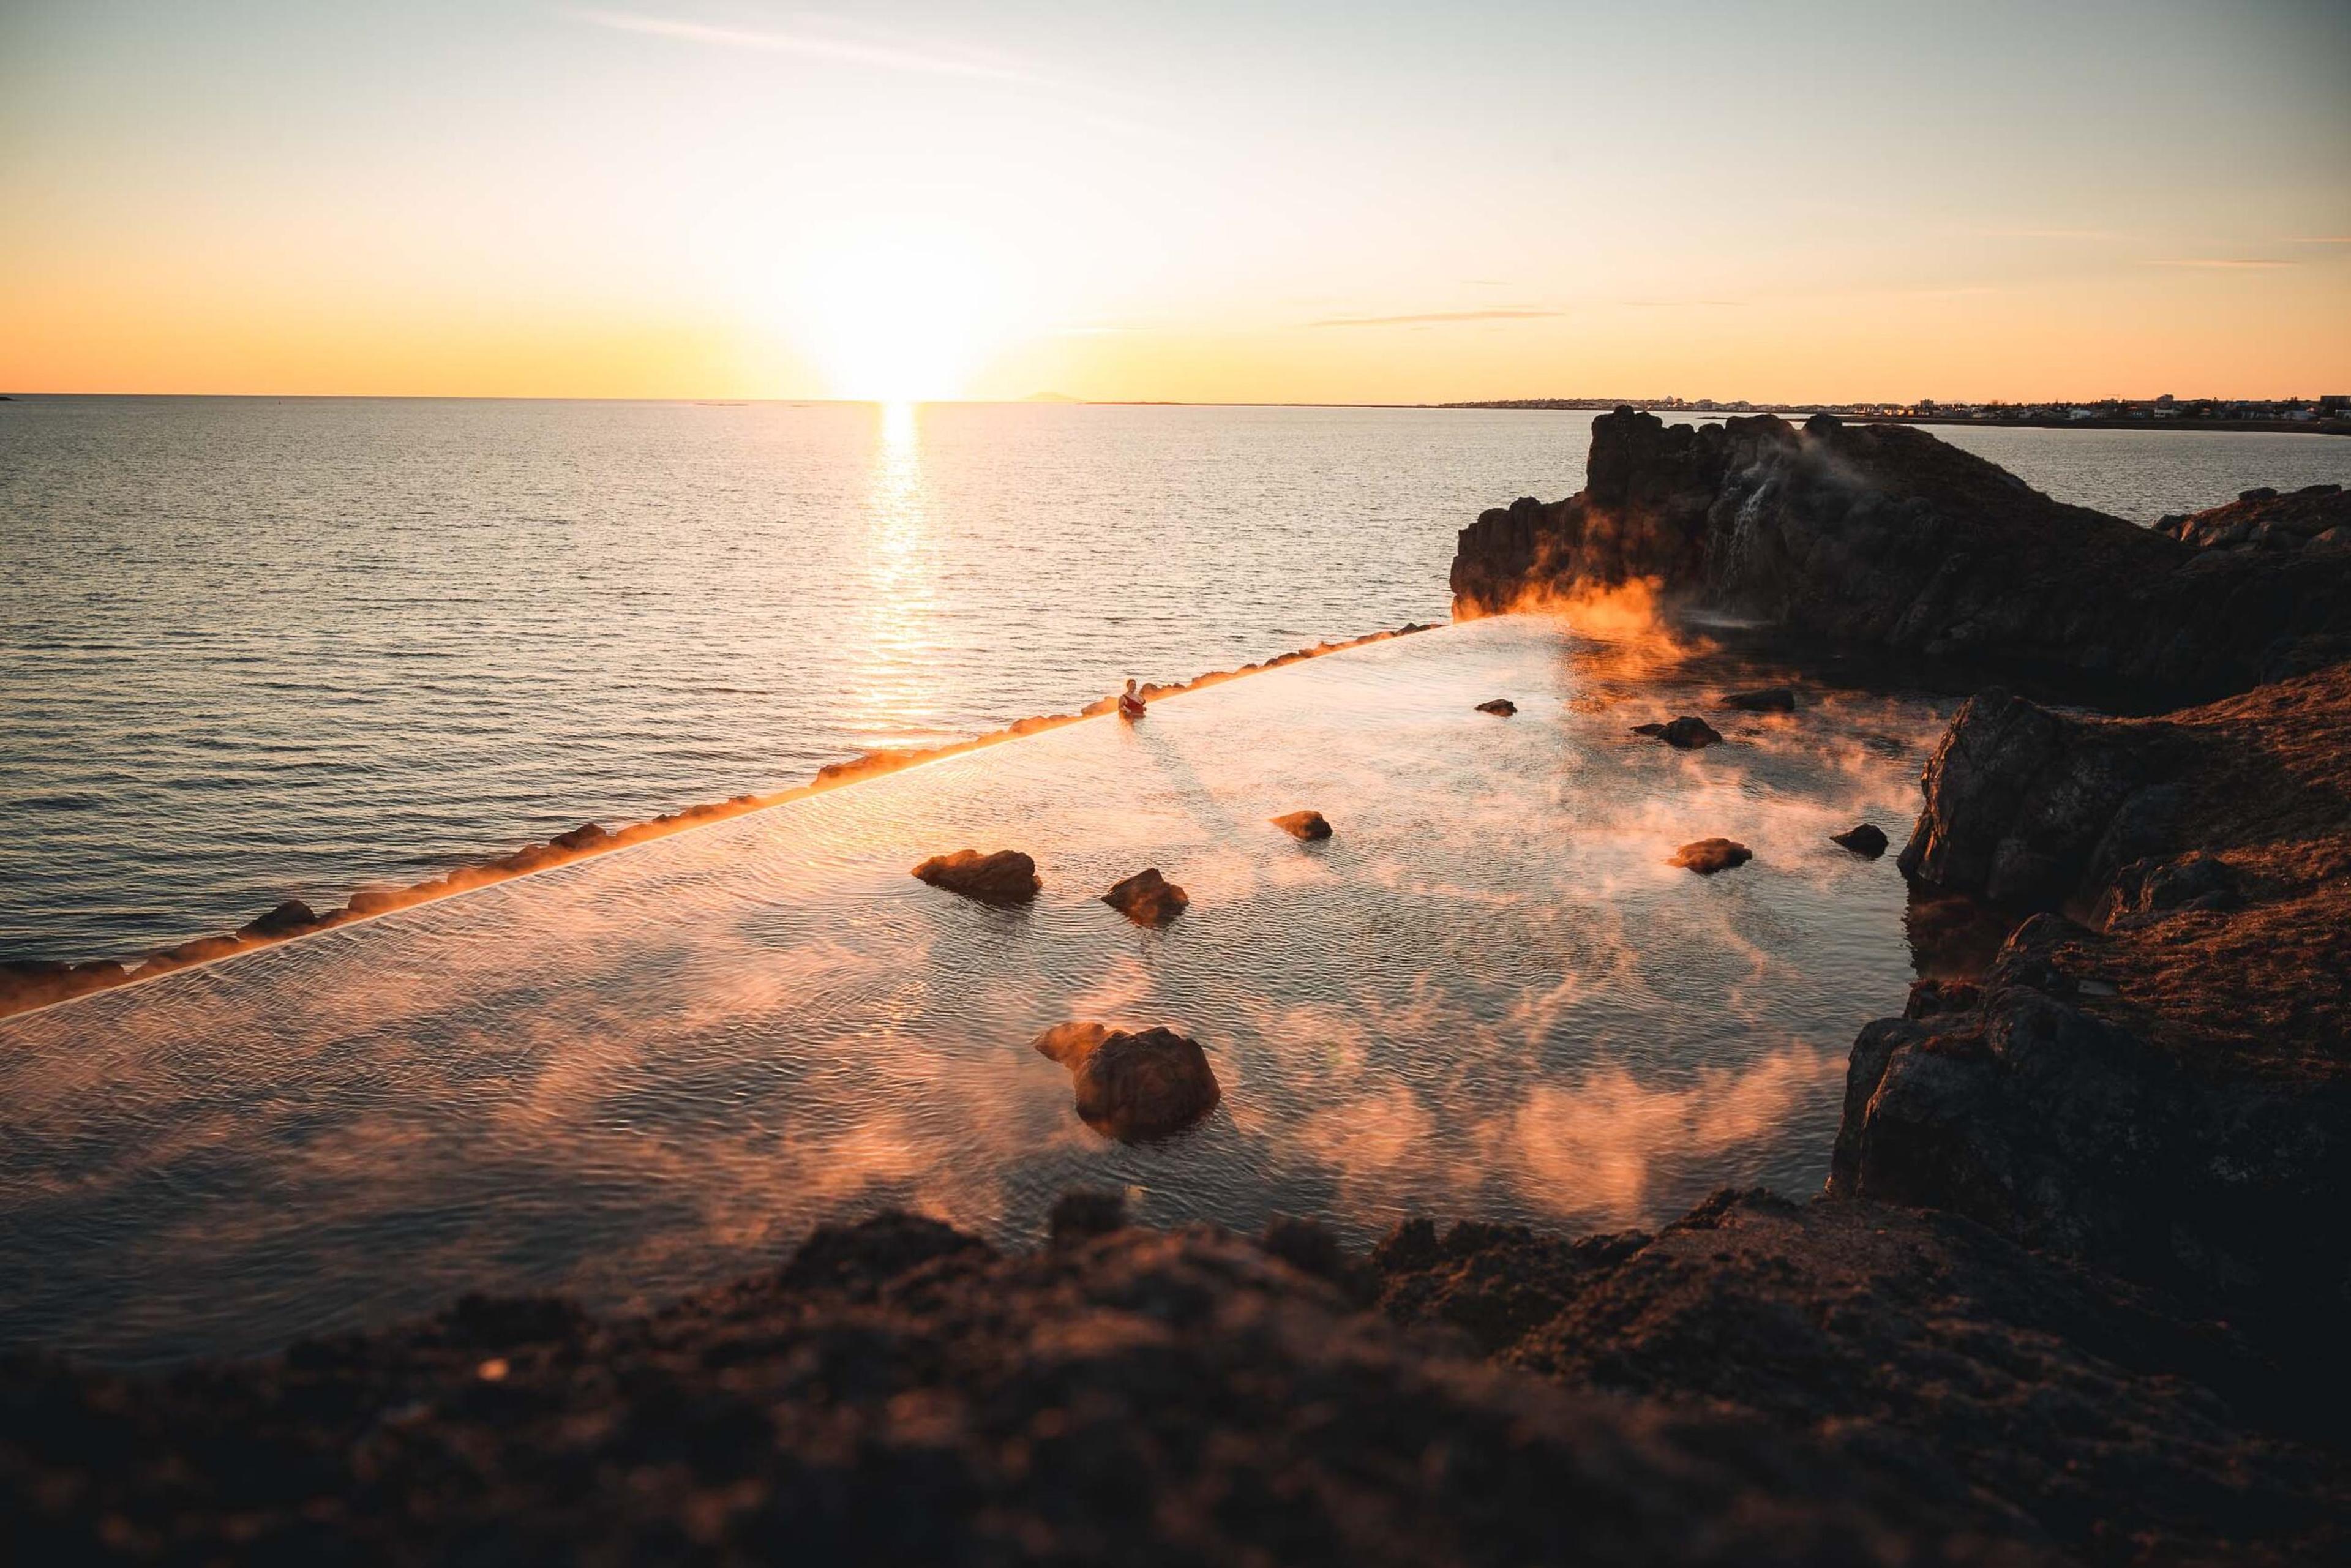 The golden hour at Sky Lagoon, where the setting sun meets the horizon, casting a warm glow over the misty geothermal waters and the rocky coast.